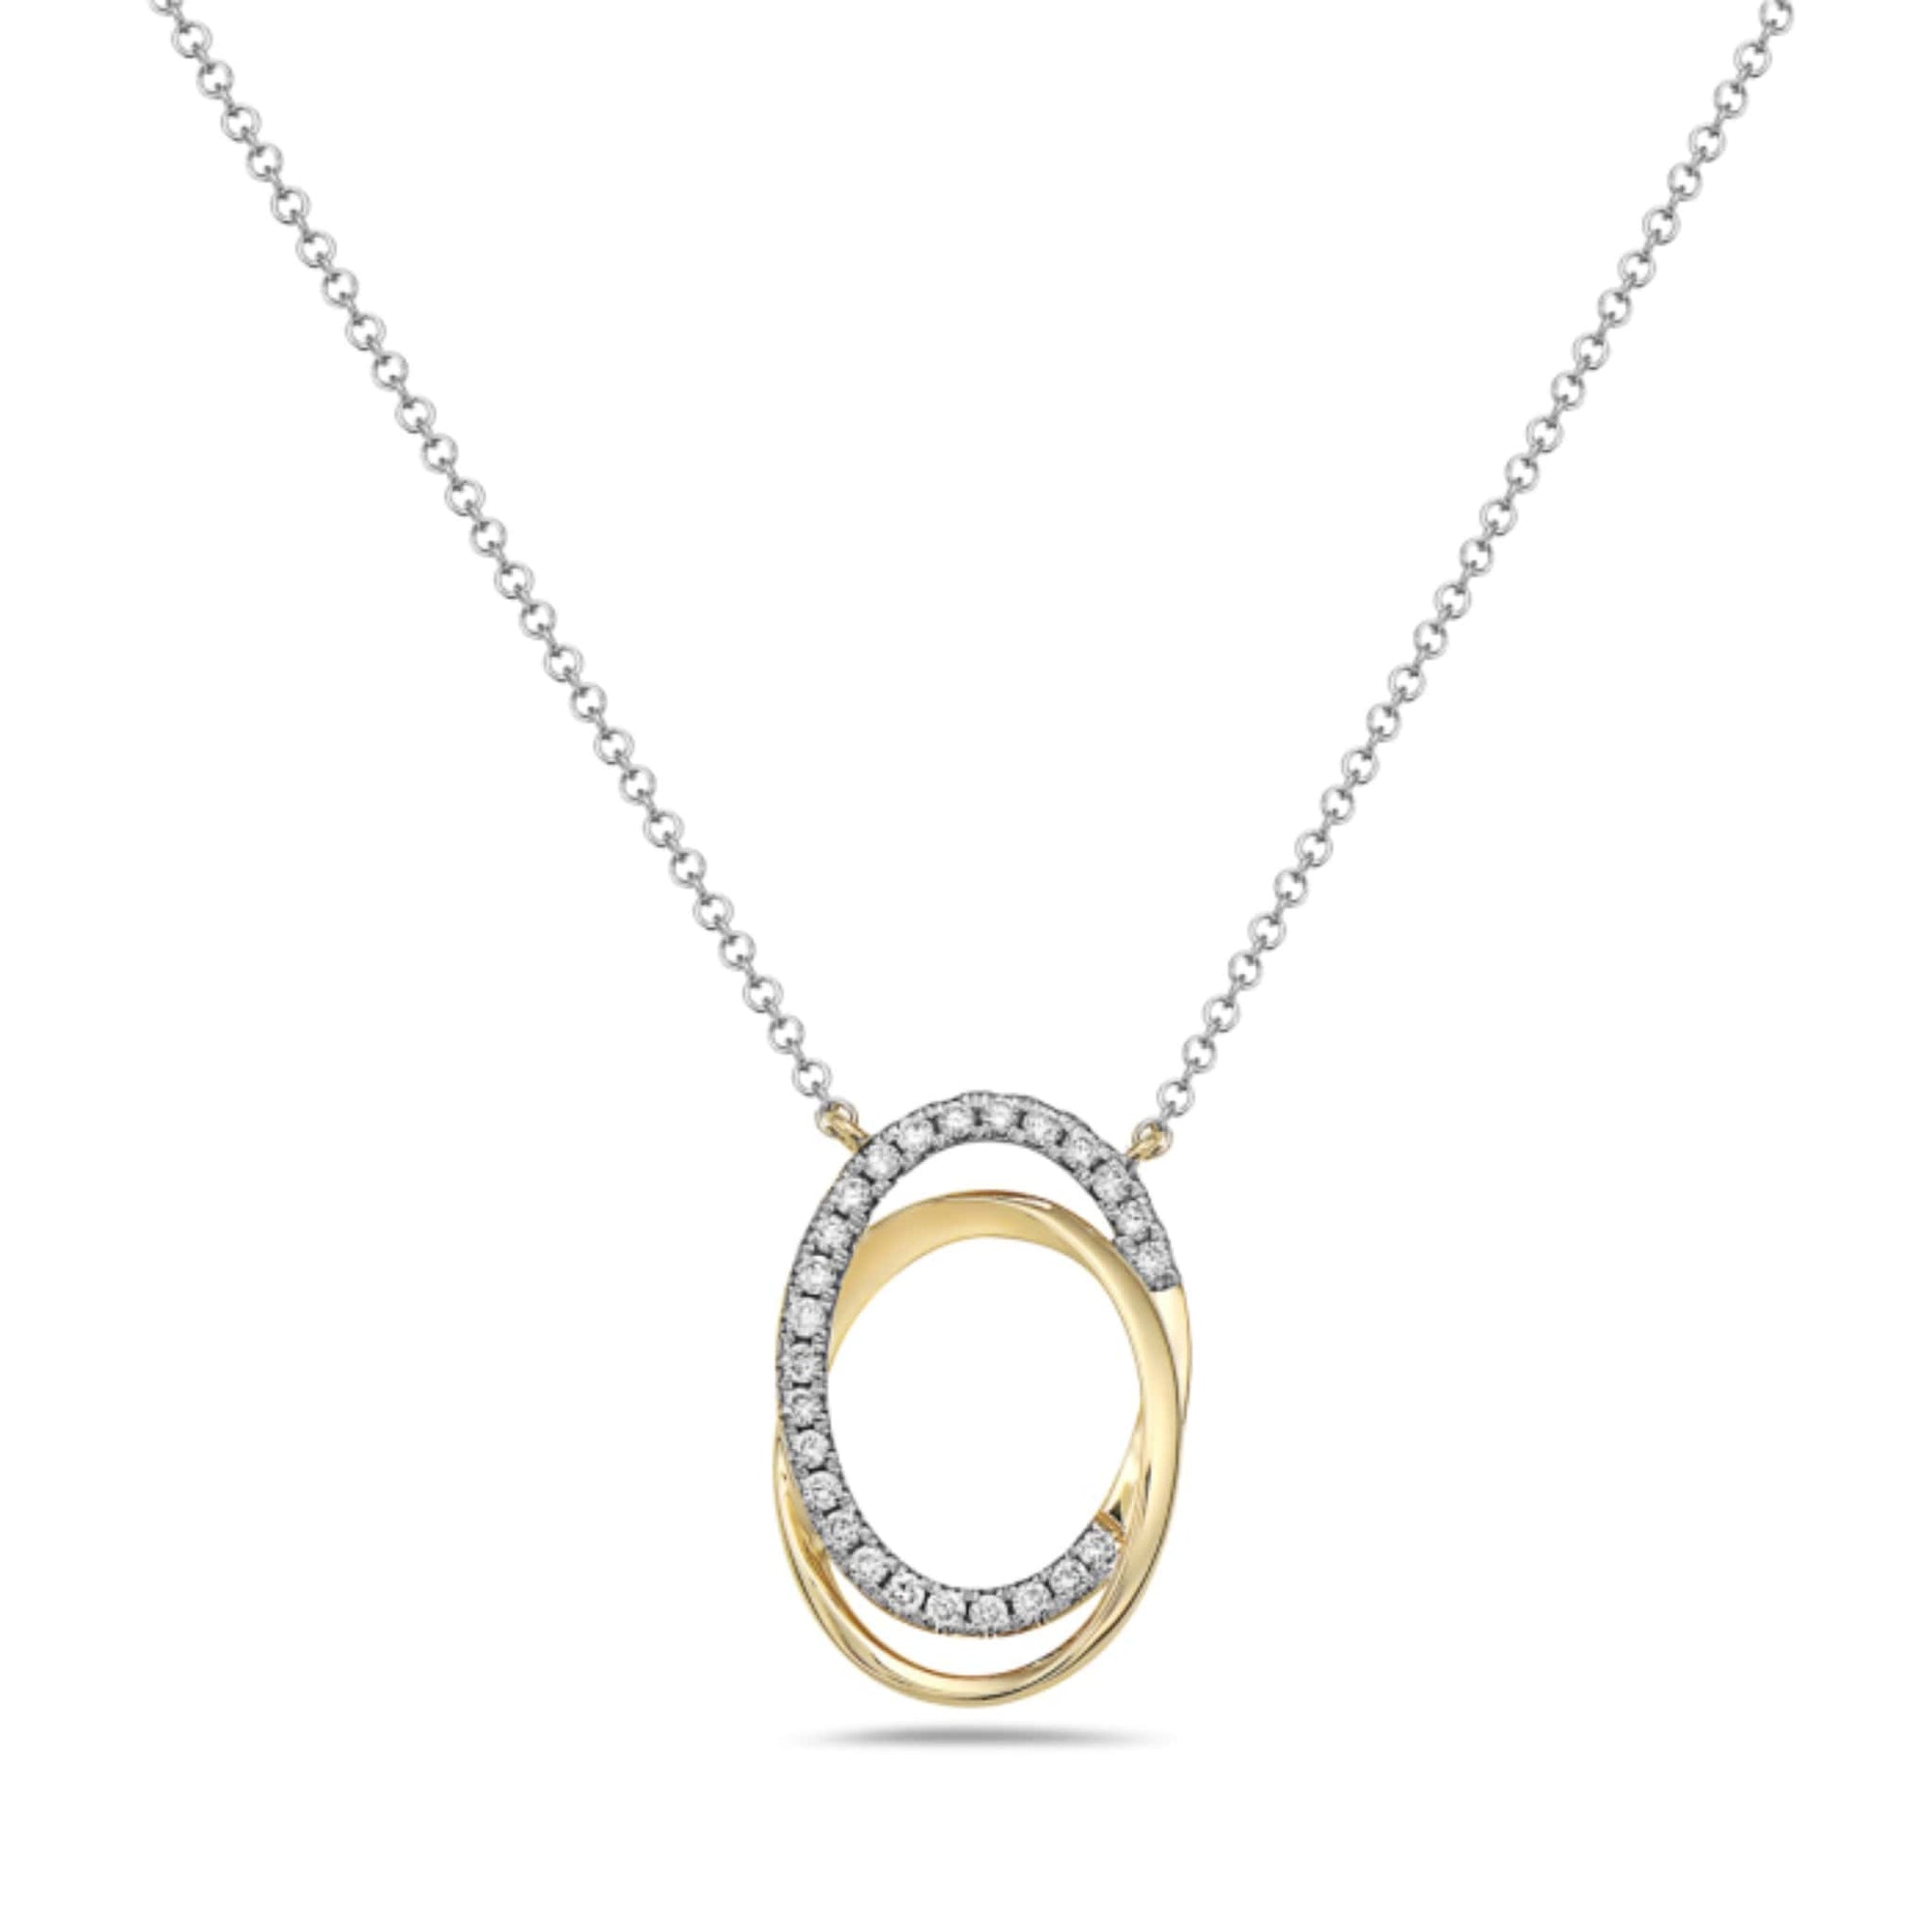 Buy Floating Diamond Necklace| Made with BIS Hallmarked Gold | Starkle